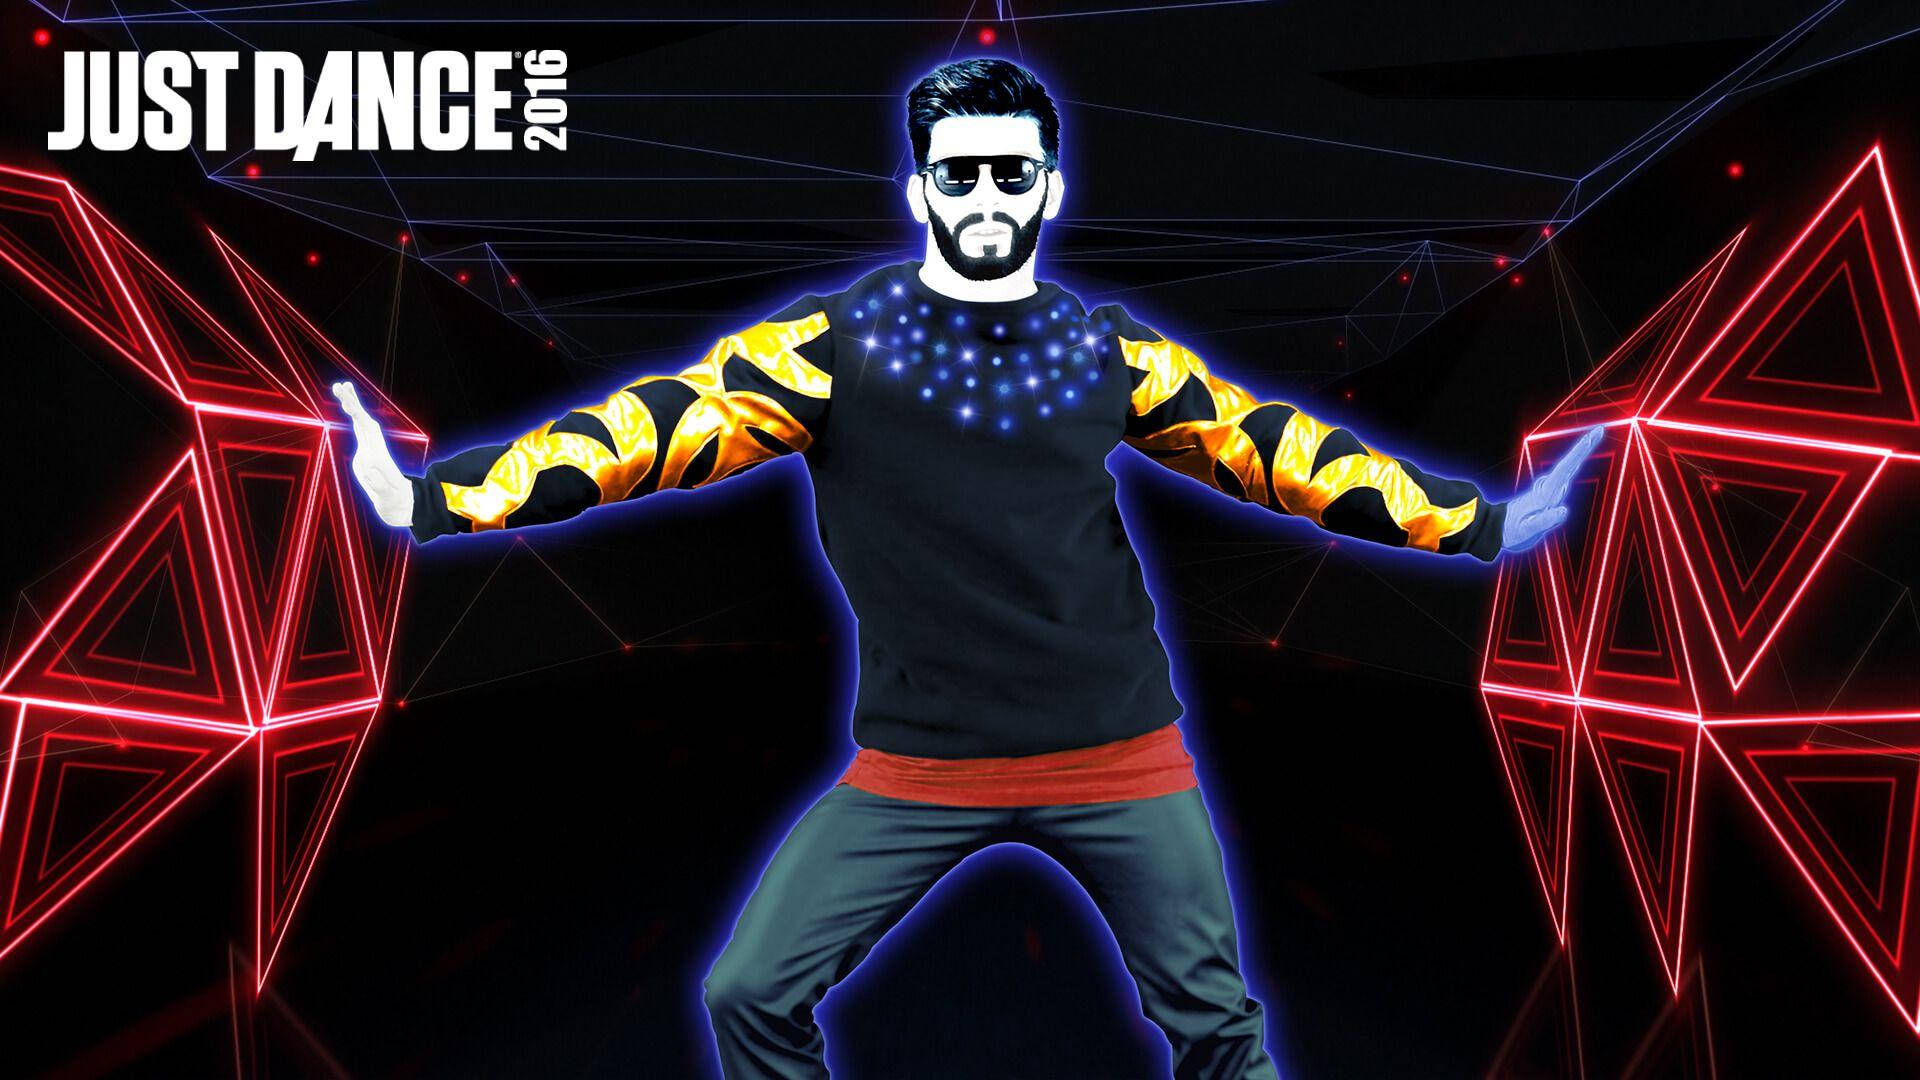 Just Dance Dancer With Beard Background